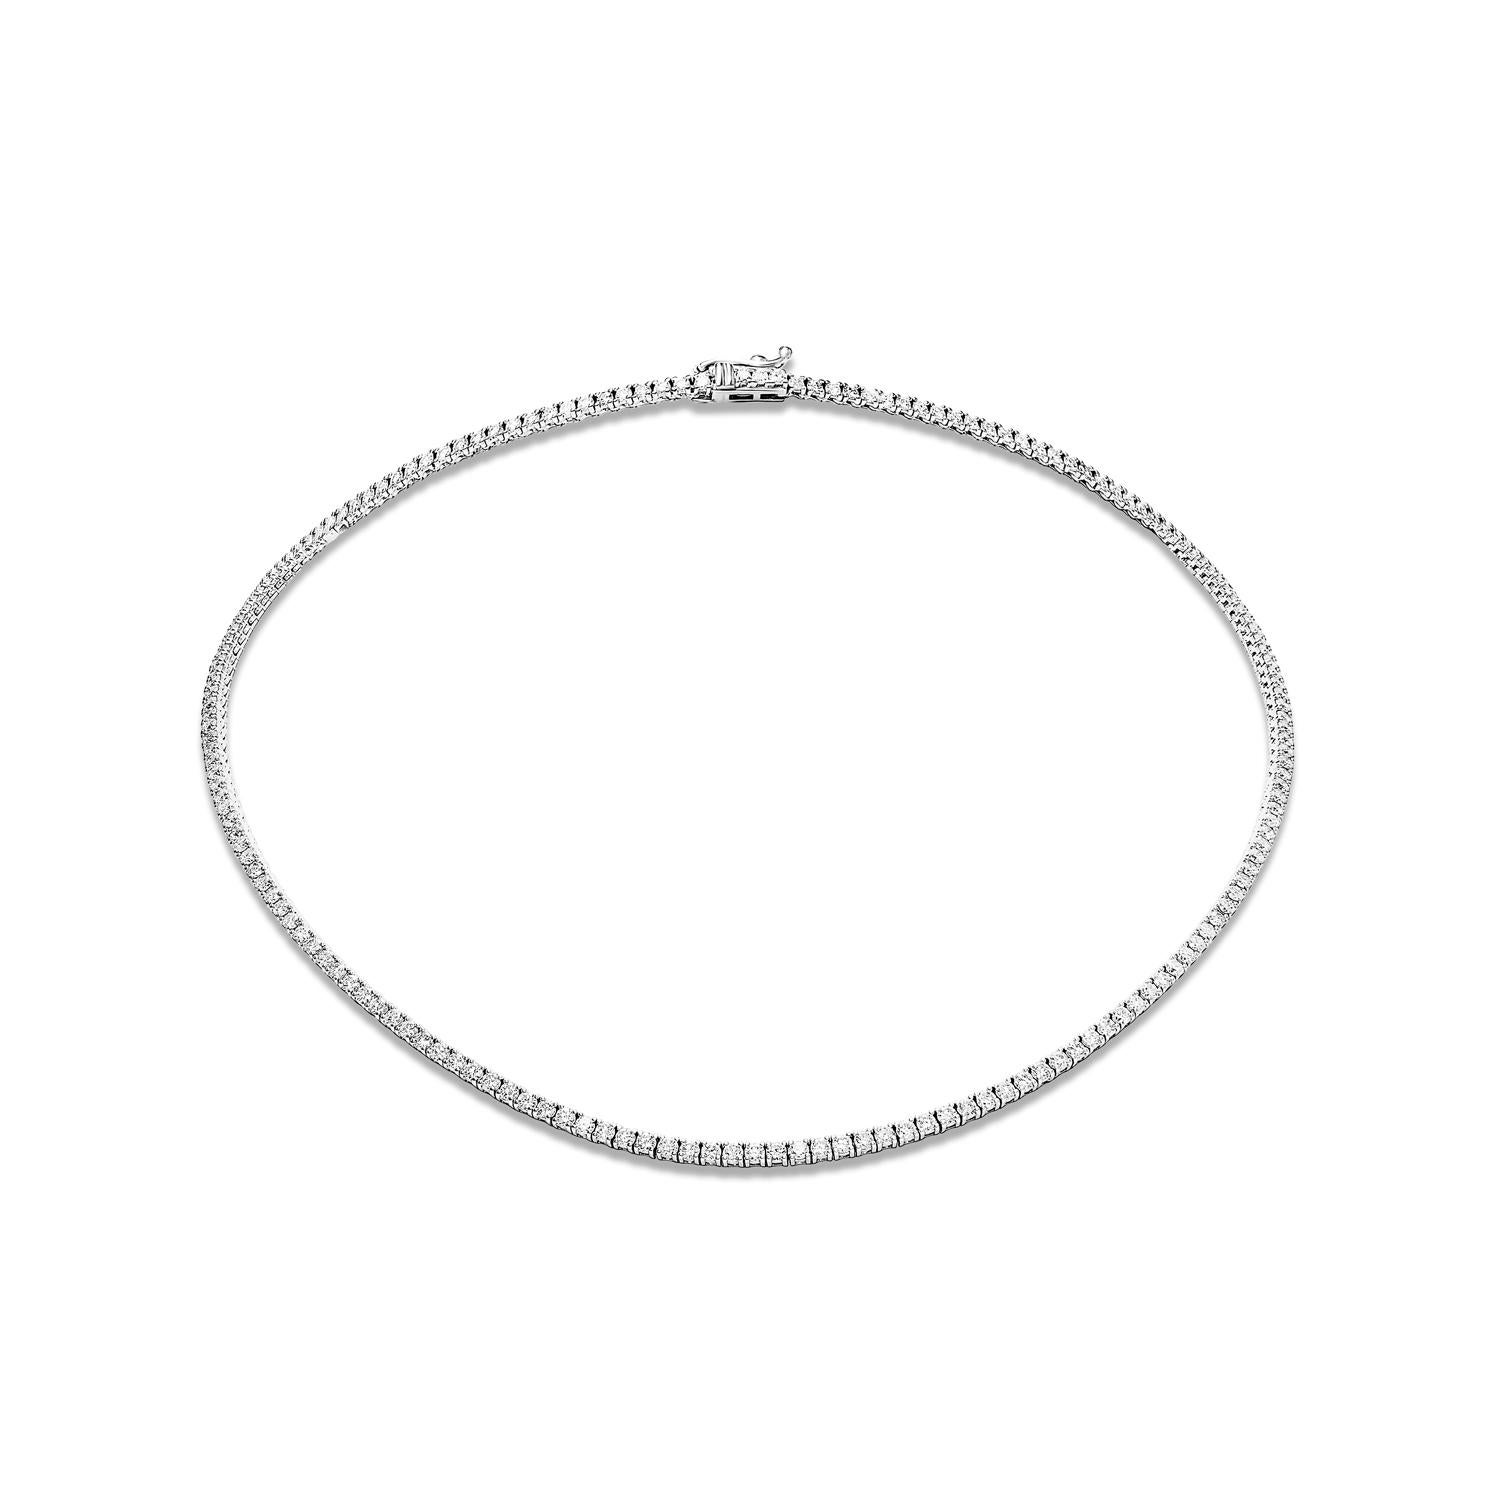 Made from round brilliant cut diamonds set in 14 karat white gold, this necklace is the perfect statement accessory for any occasion. Whether you're going out on the town or attending a formal event, this necklace is sure to turn heads and make a